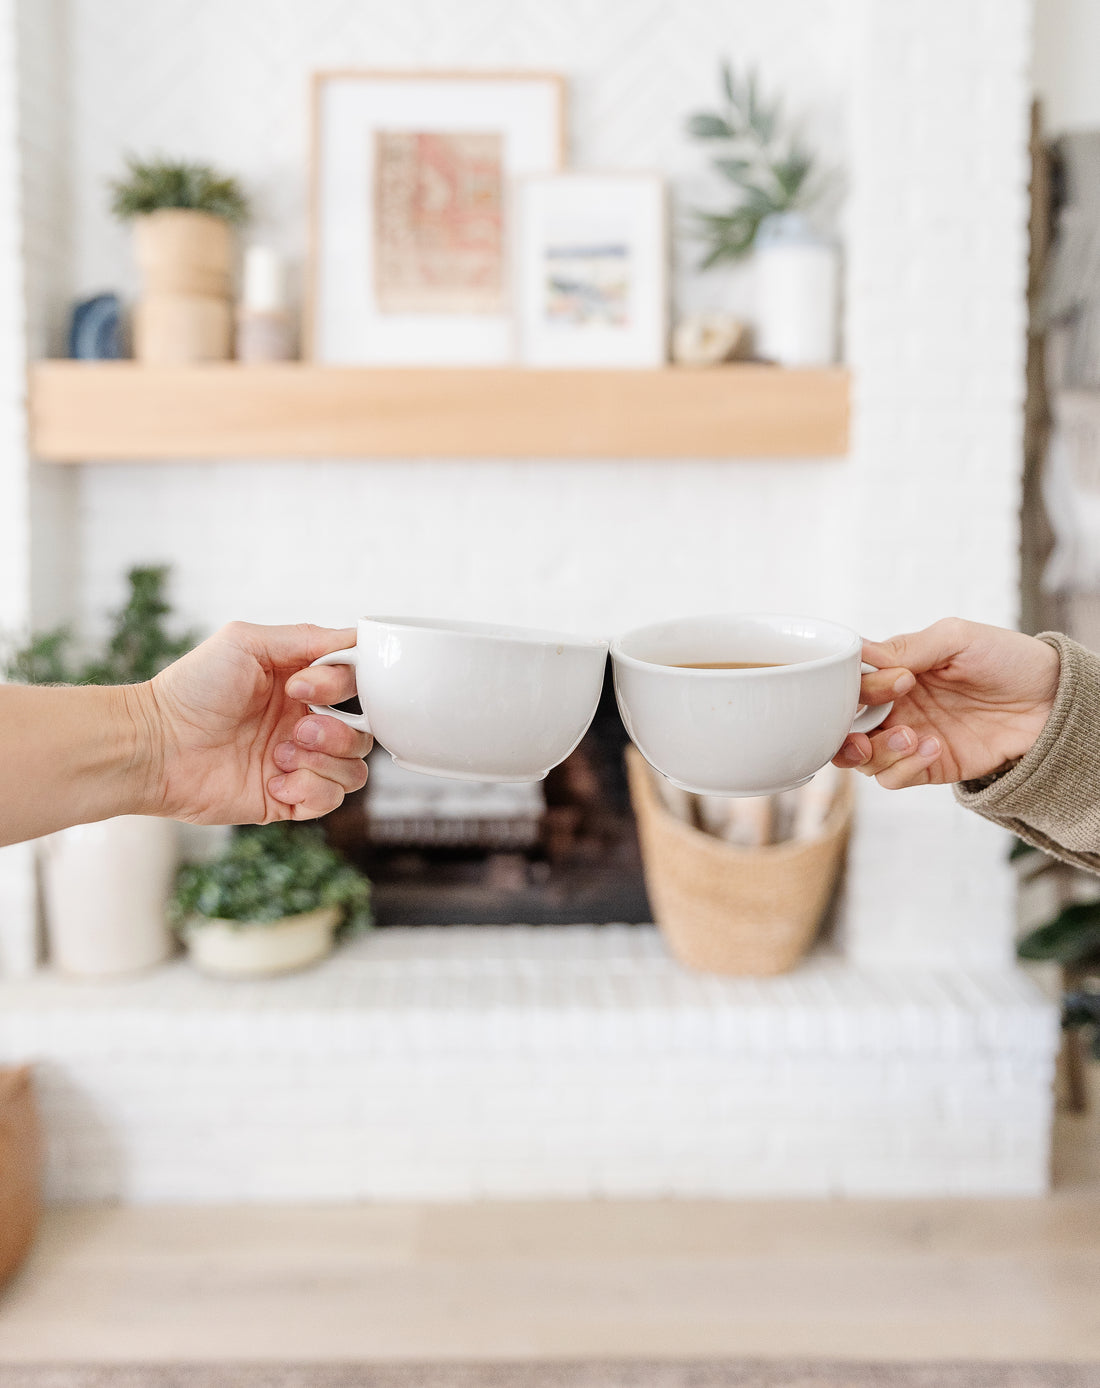 Coffee mug cheers at home in front of fireplace